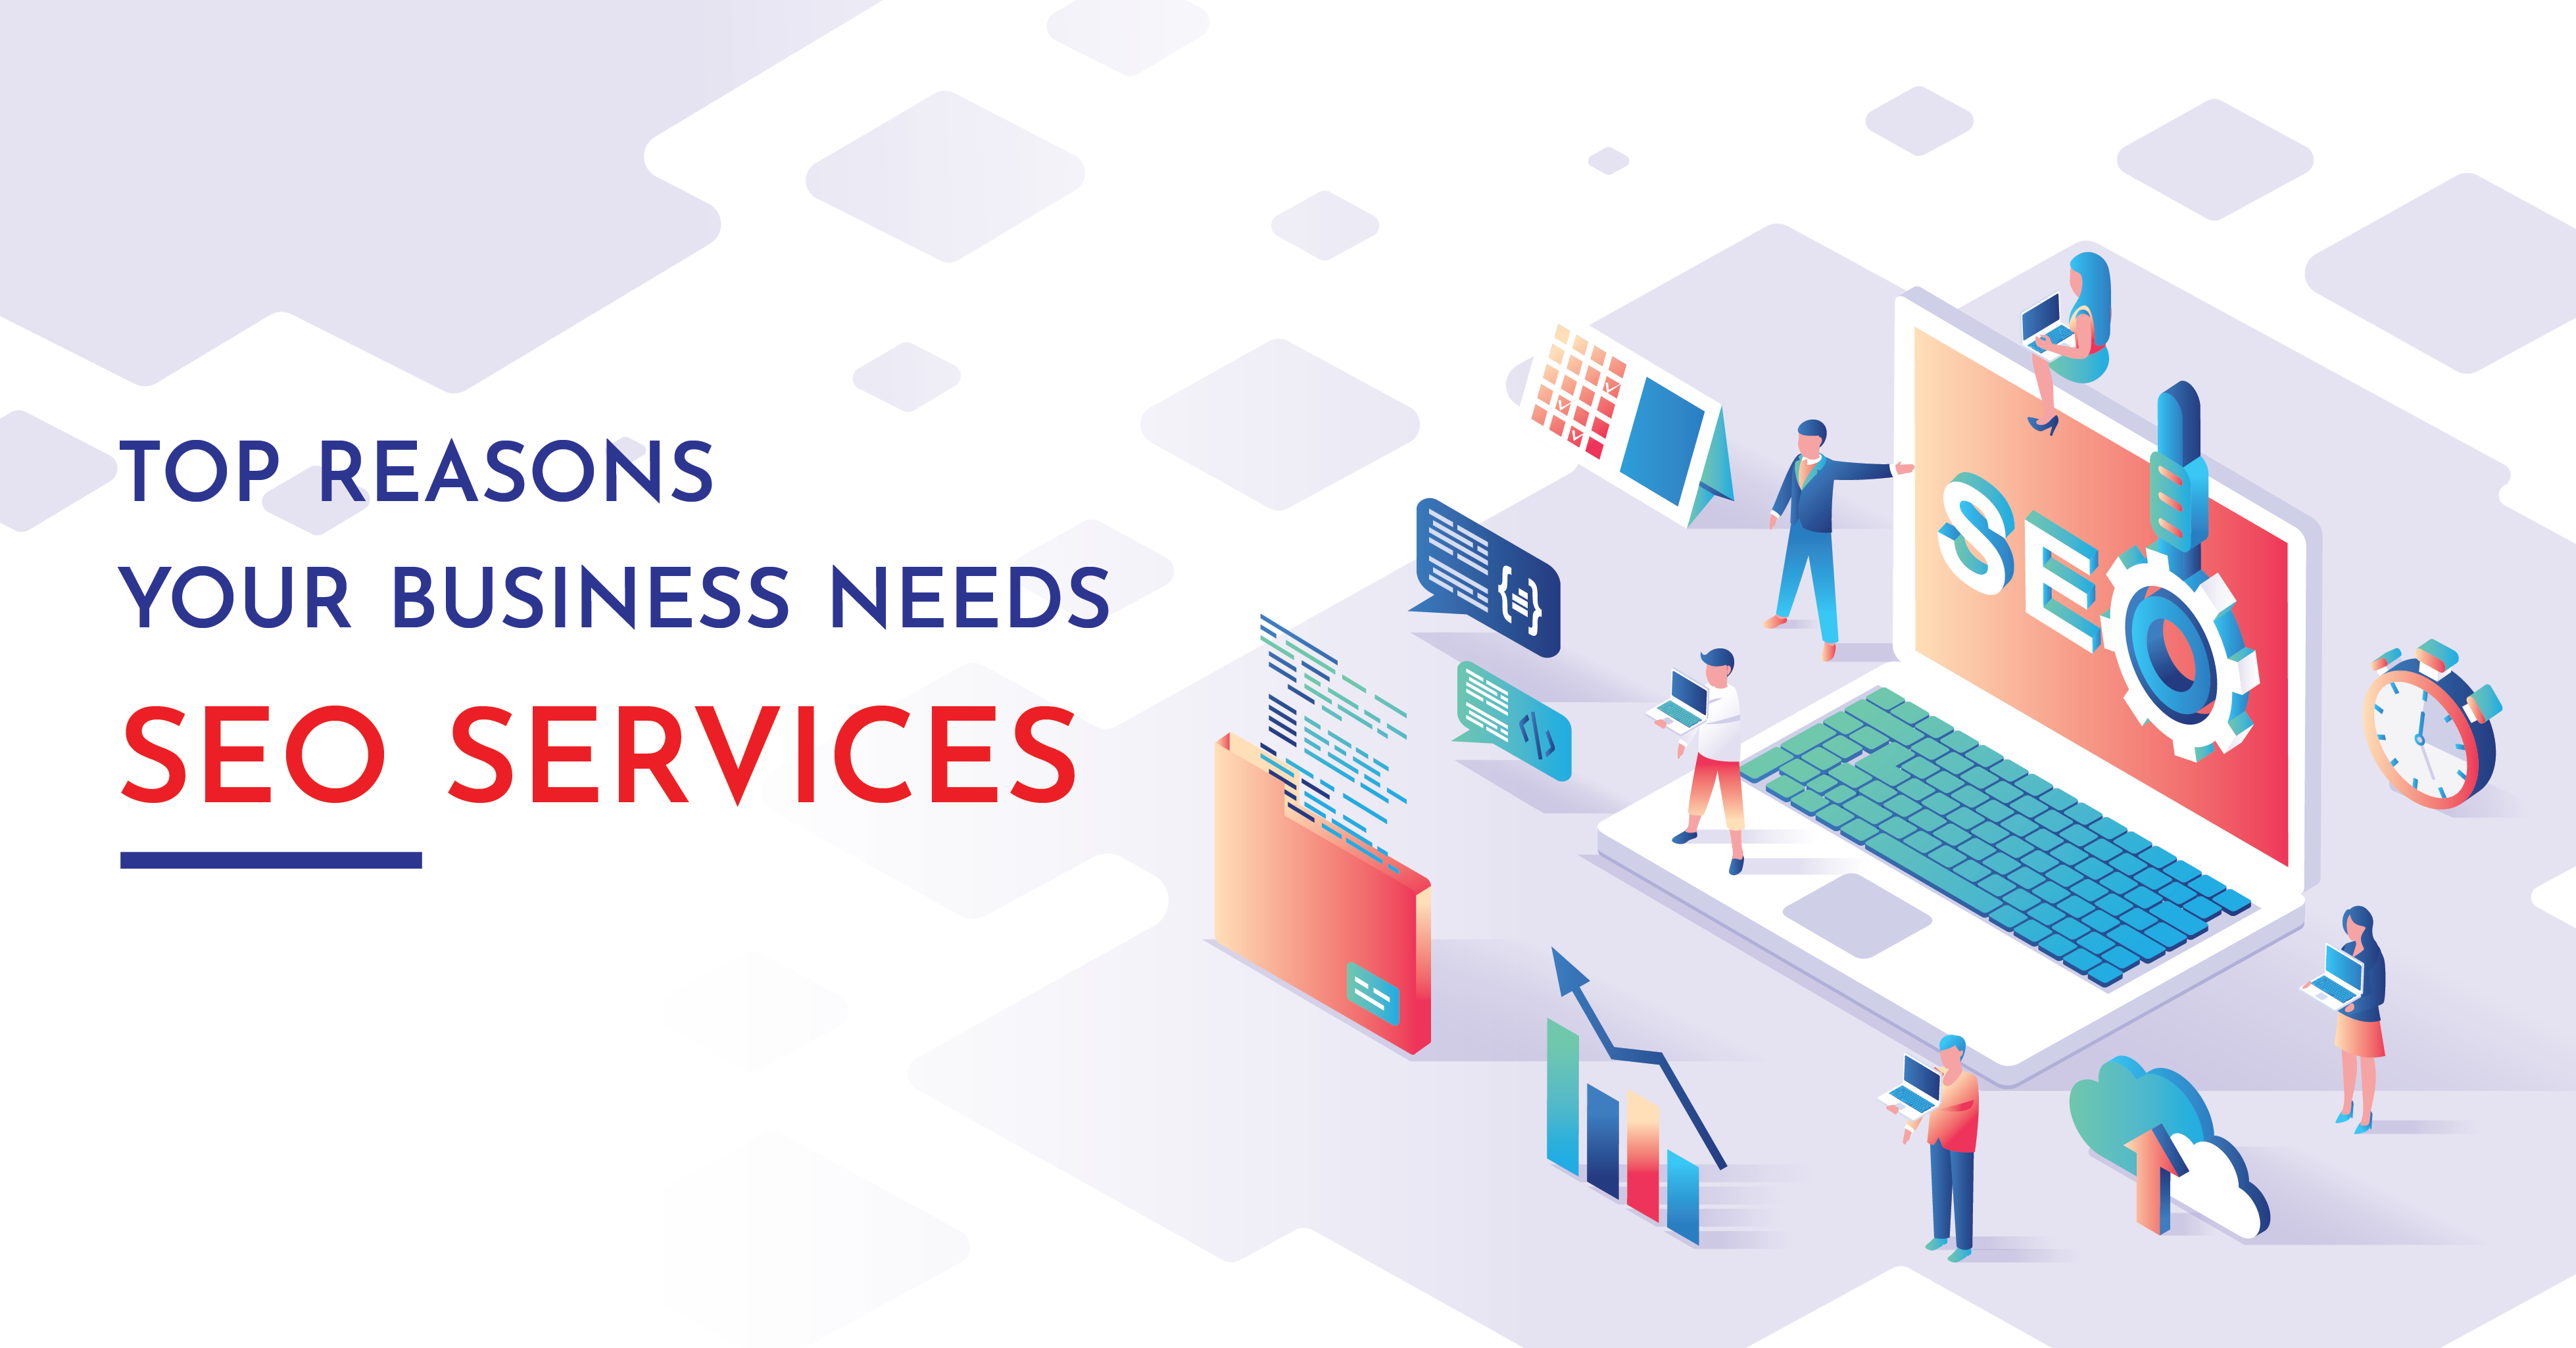 Top reasons your business needs SEO services